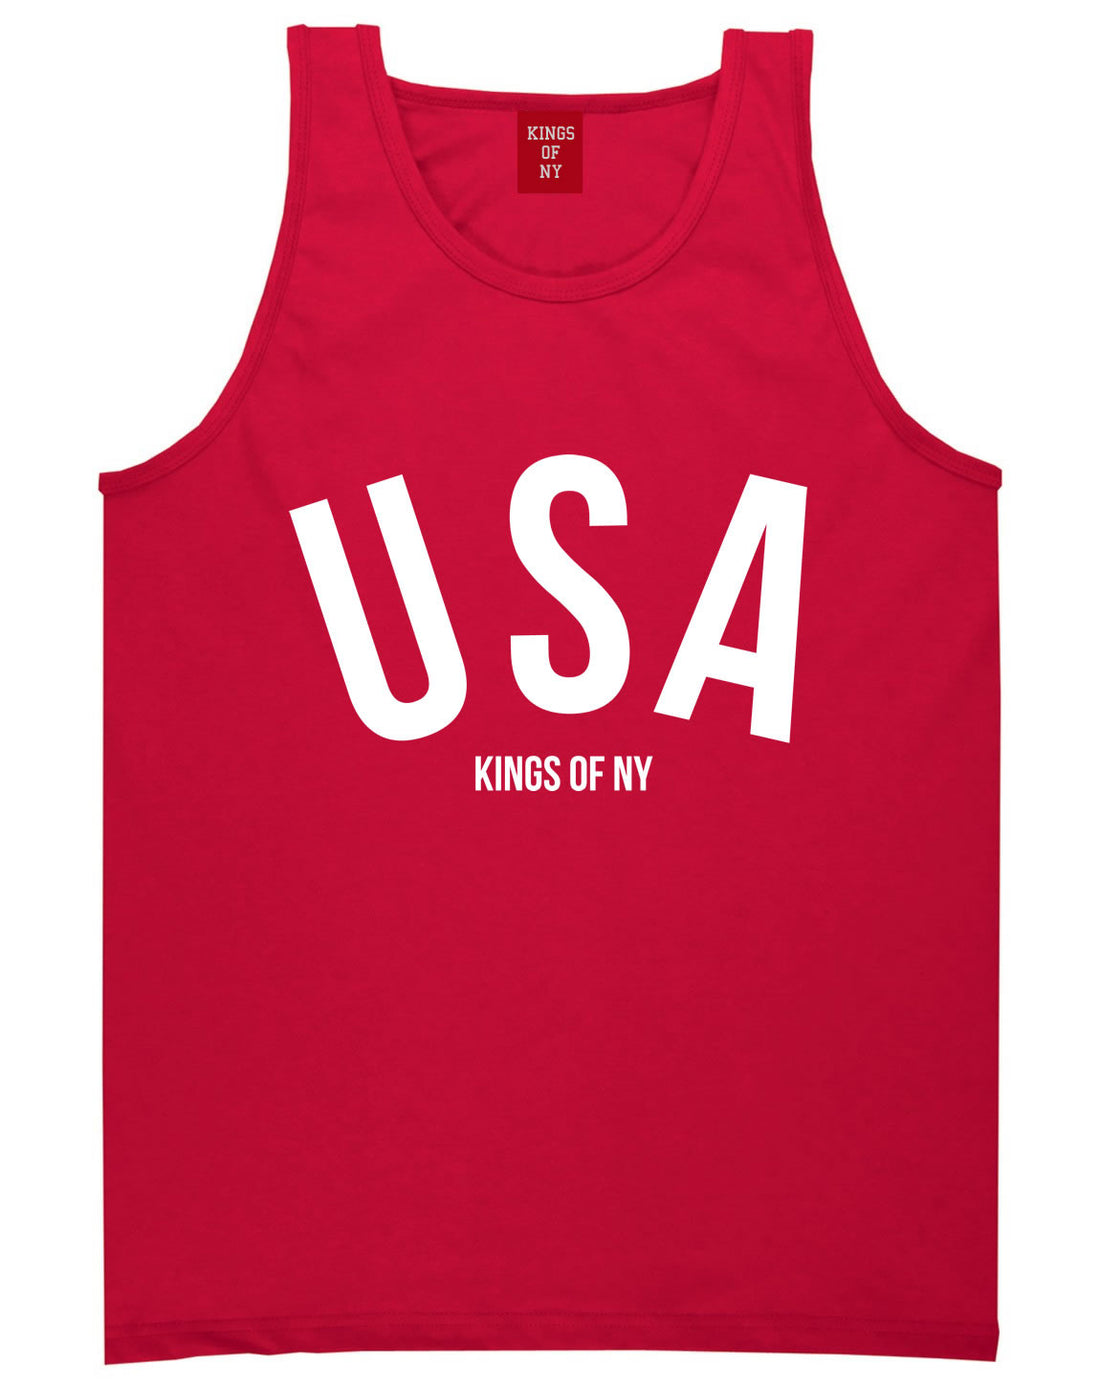 USA Tank Top in Red by Kings Of NY